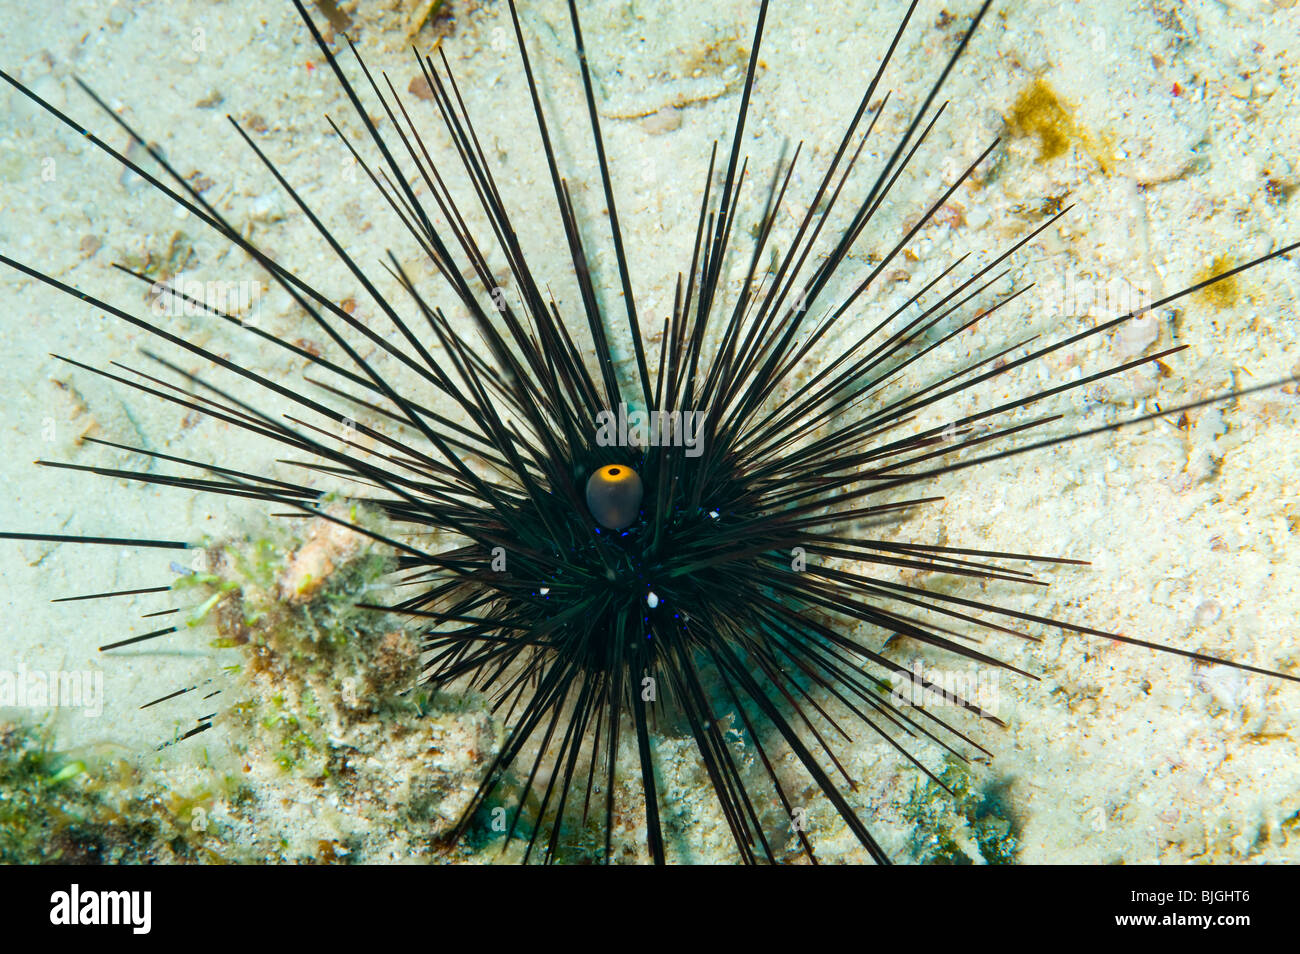 Long spined sea urchin Diadema savignyi black with light blue lines long spin longspined long-spined wildlife under water sealif Stock Photo